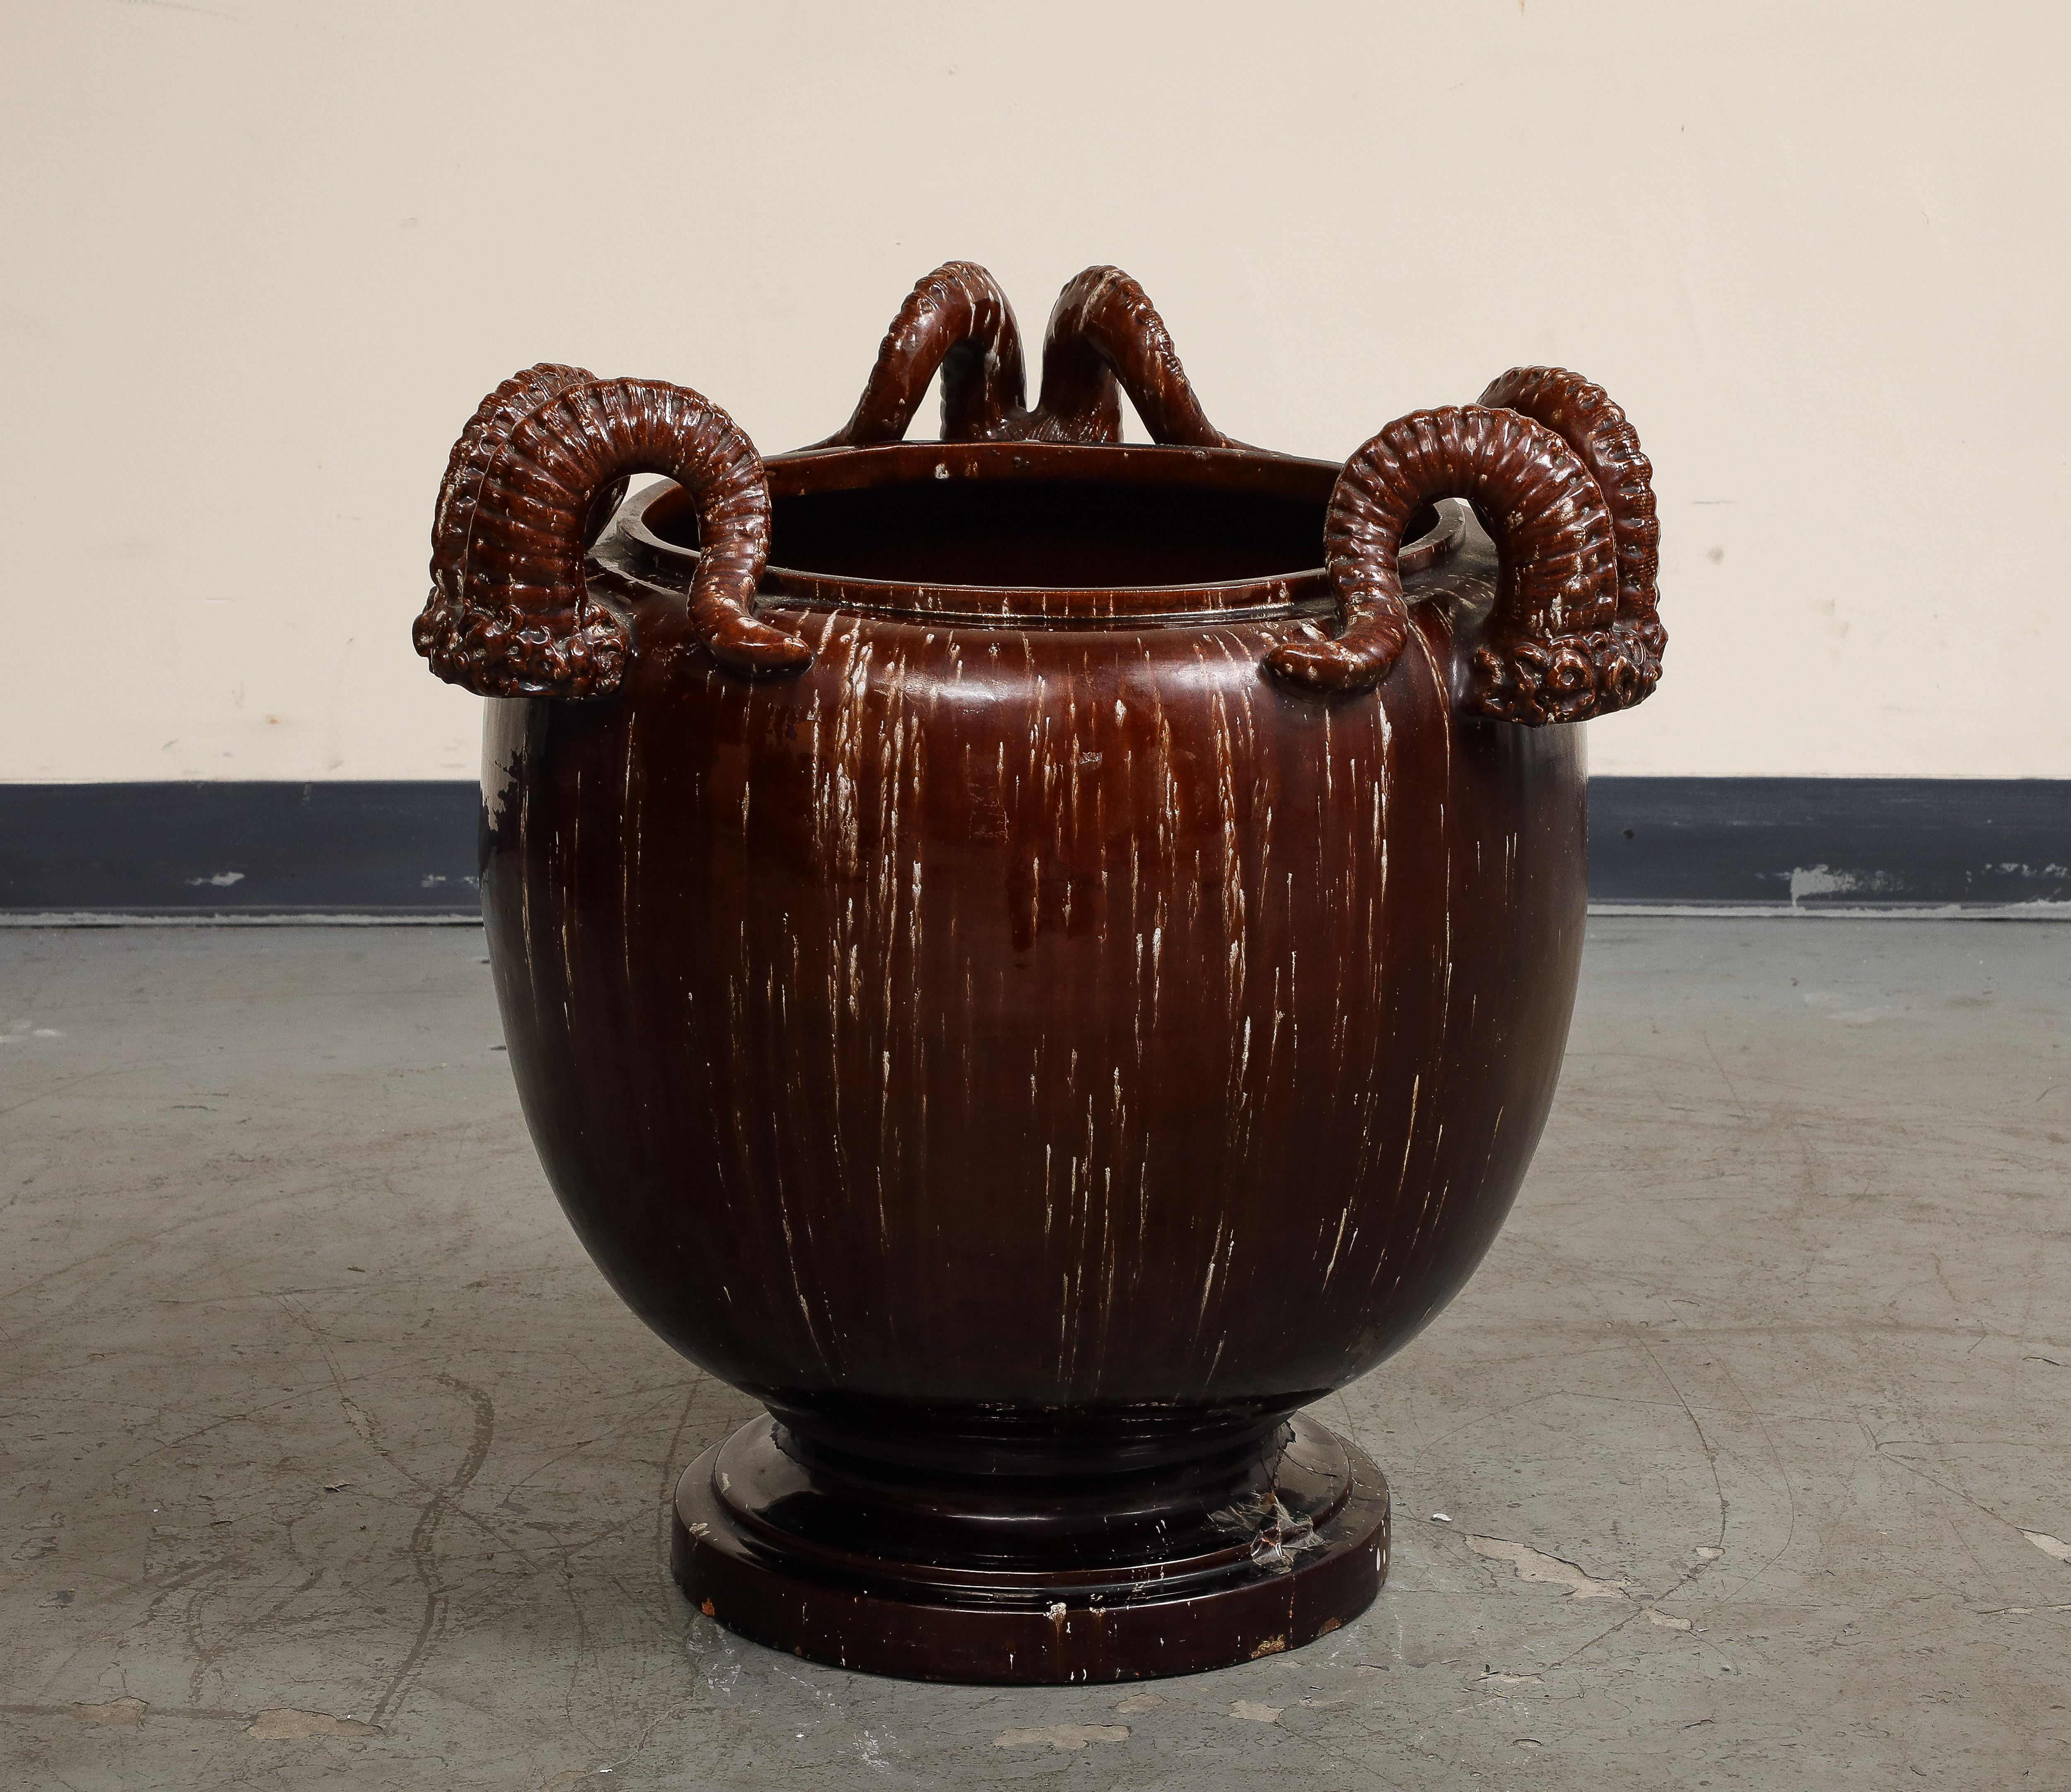 Burgundy Glazed Chinese Pottery Jardiniere with Ram's Horns, 20th Century. 

opening 14 3/4